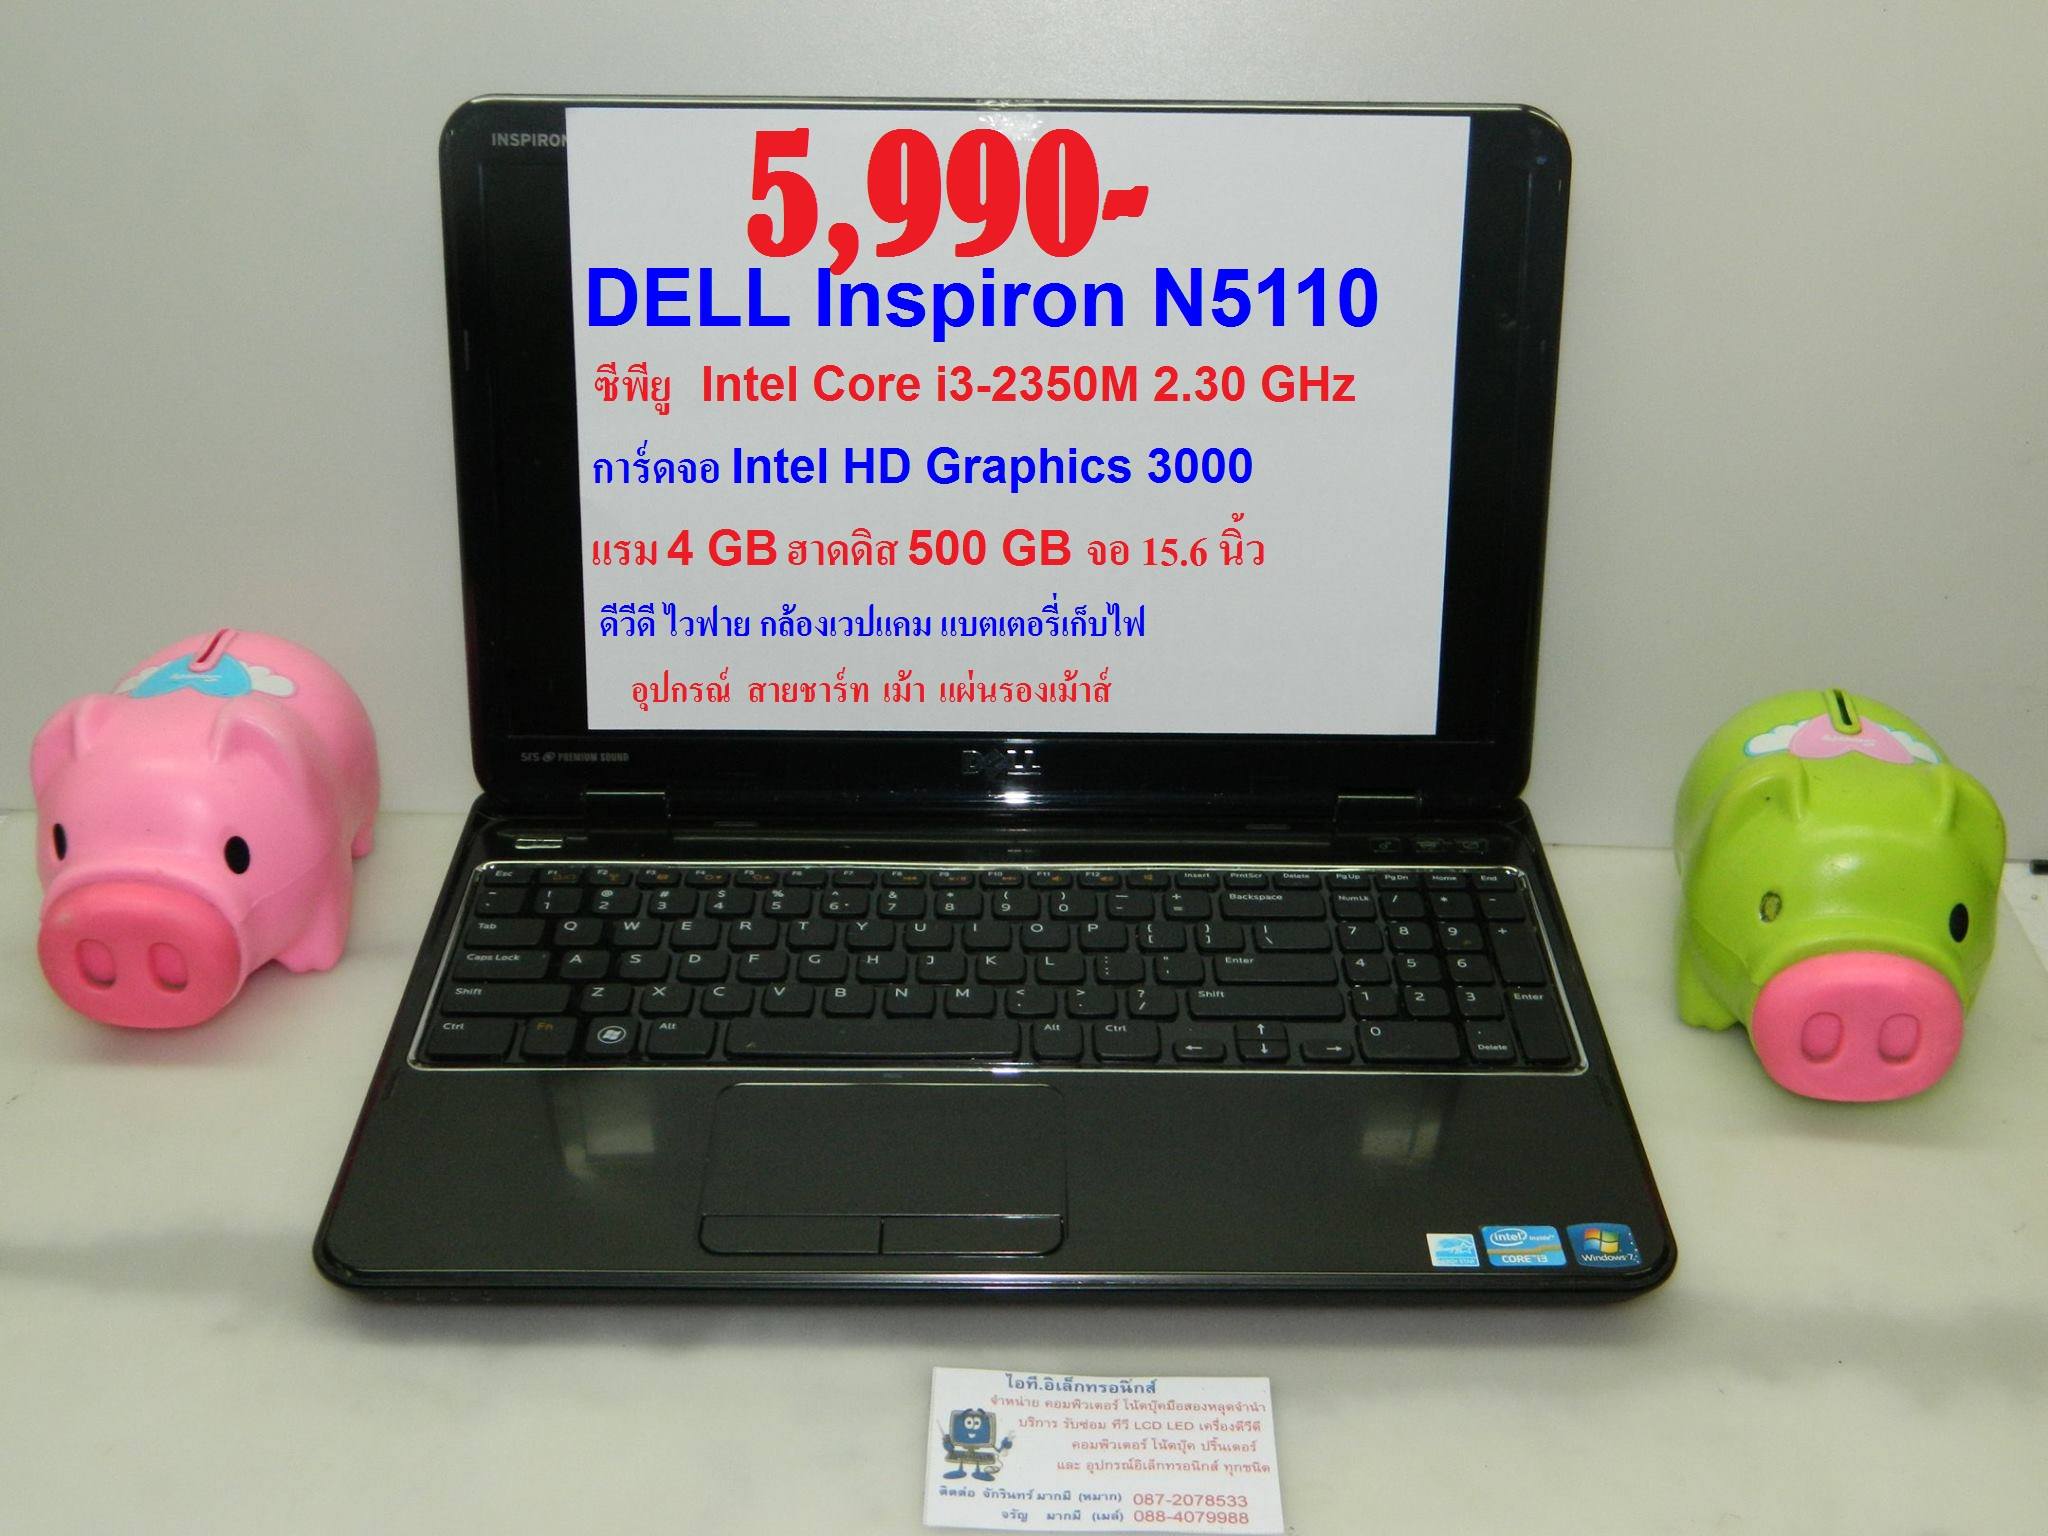 DELL Inspiron N5110 รูปที่ 1